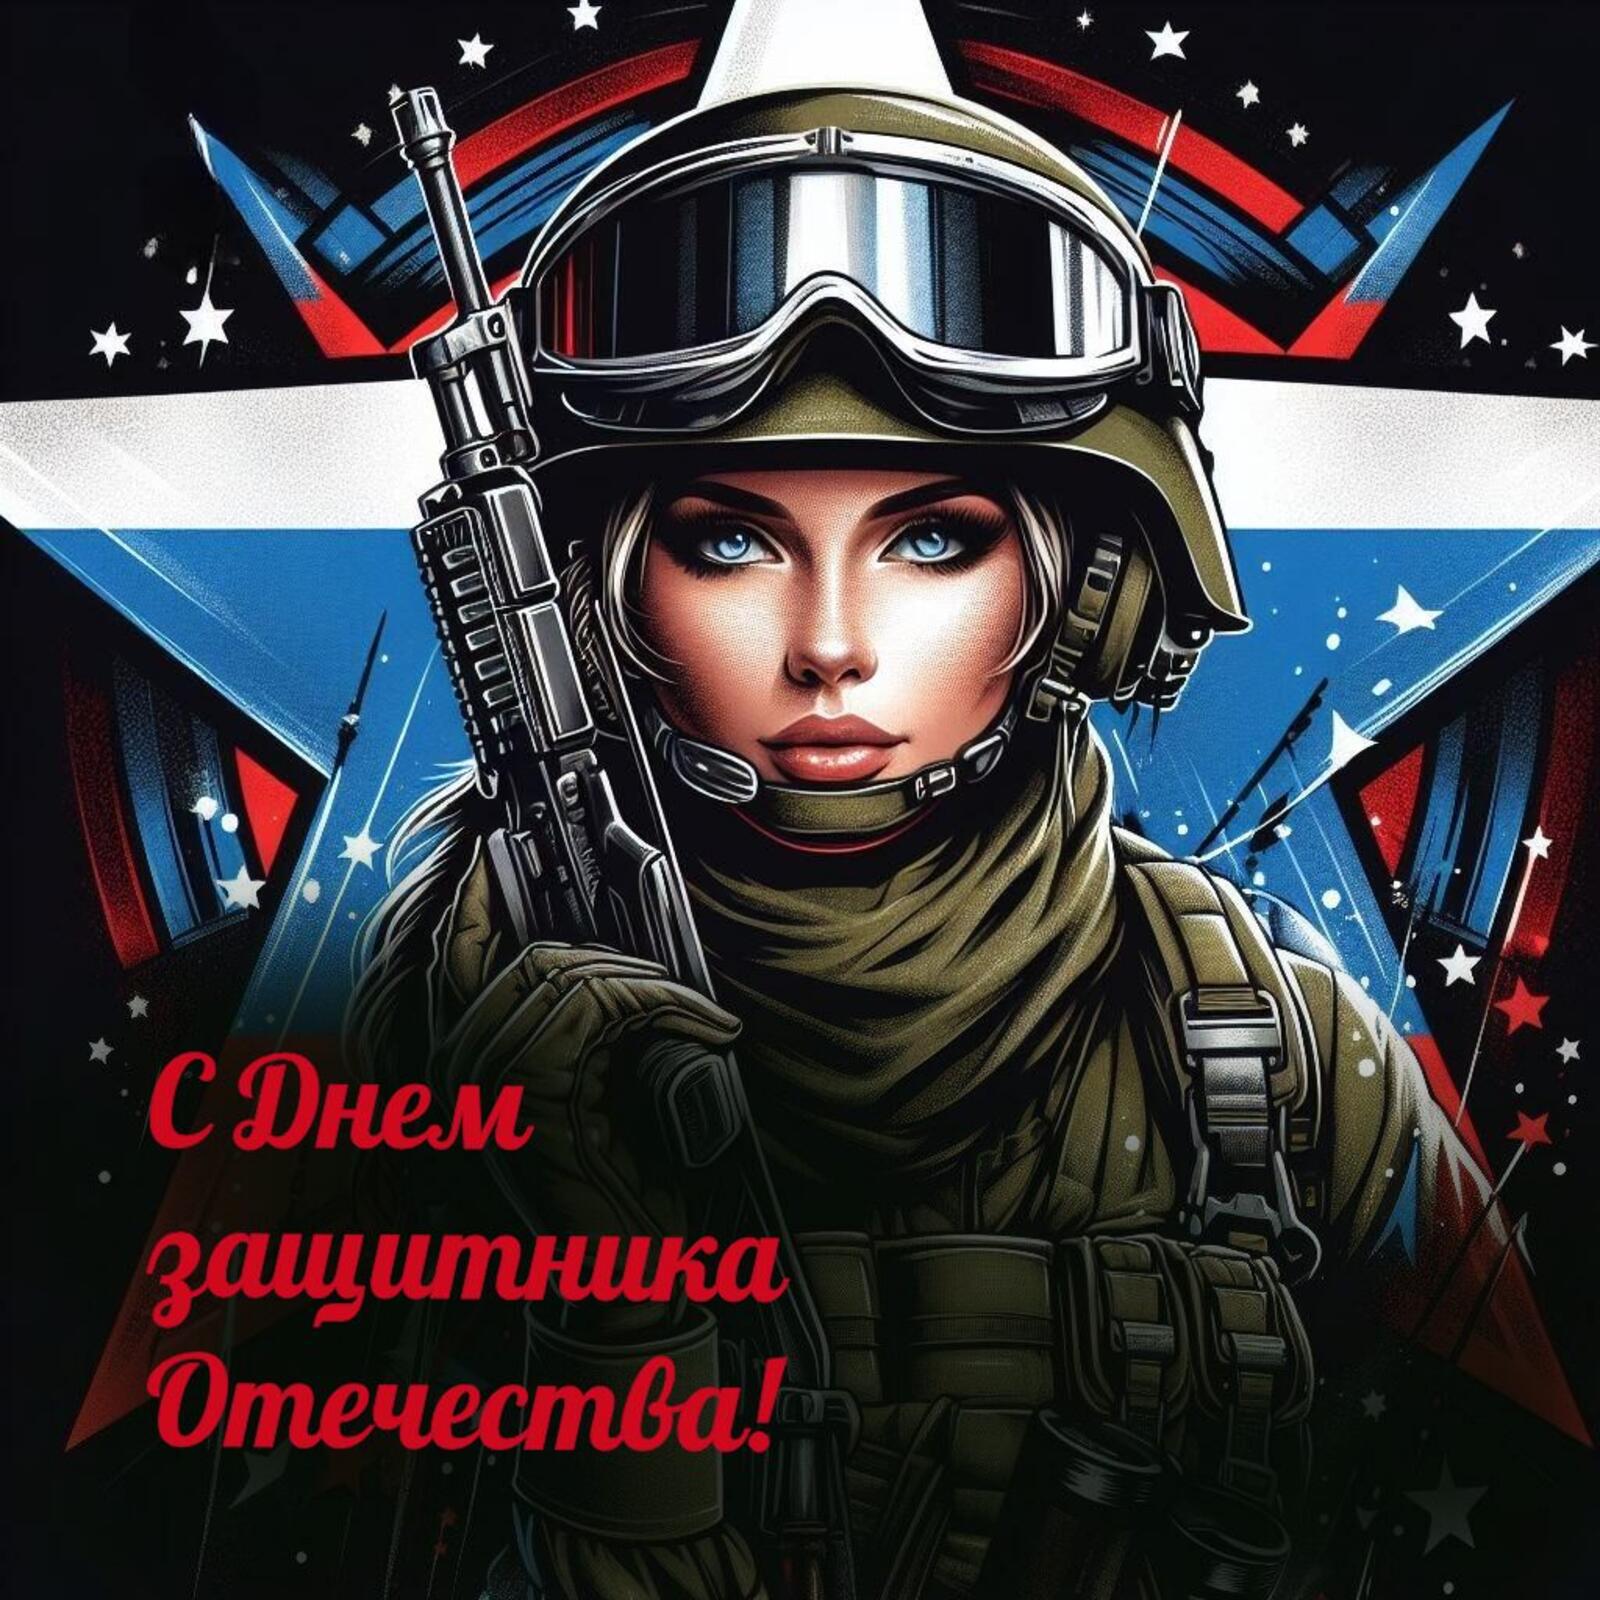 On February 23rd, the girl soldier congratulates all men